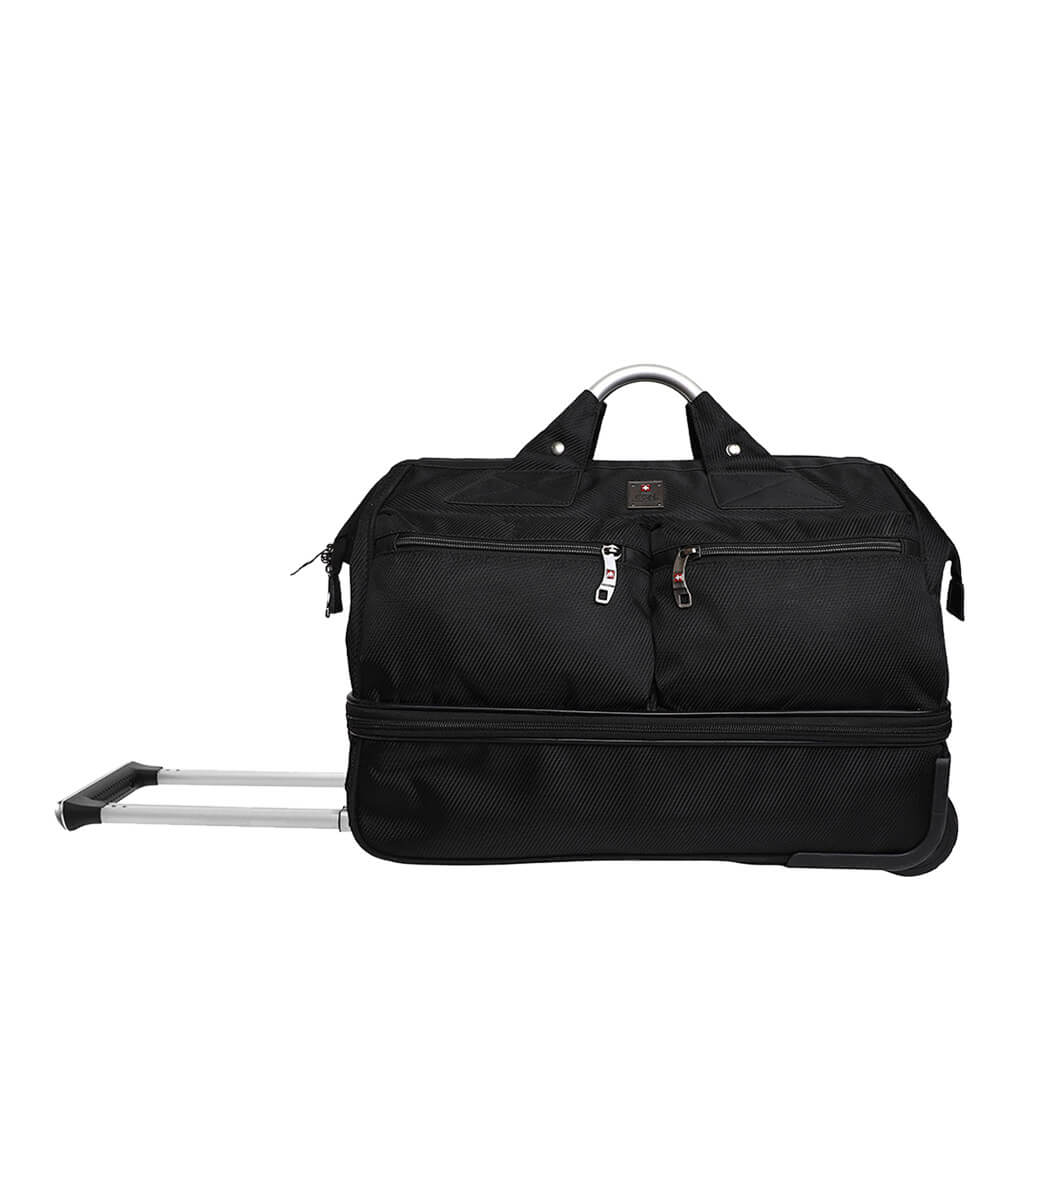 Double Decker Duffle Bag With Trolley Black